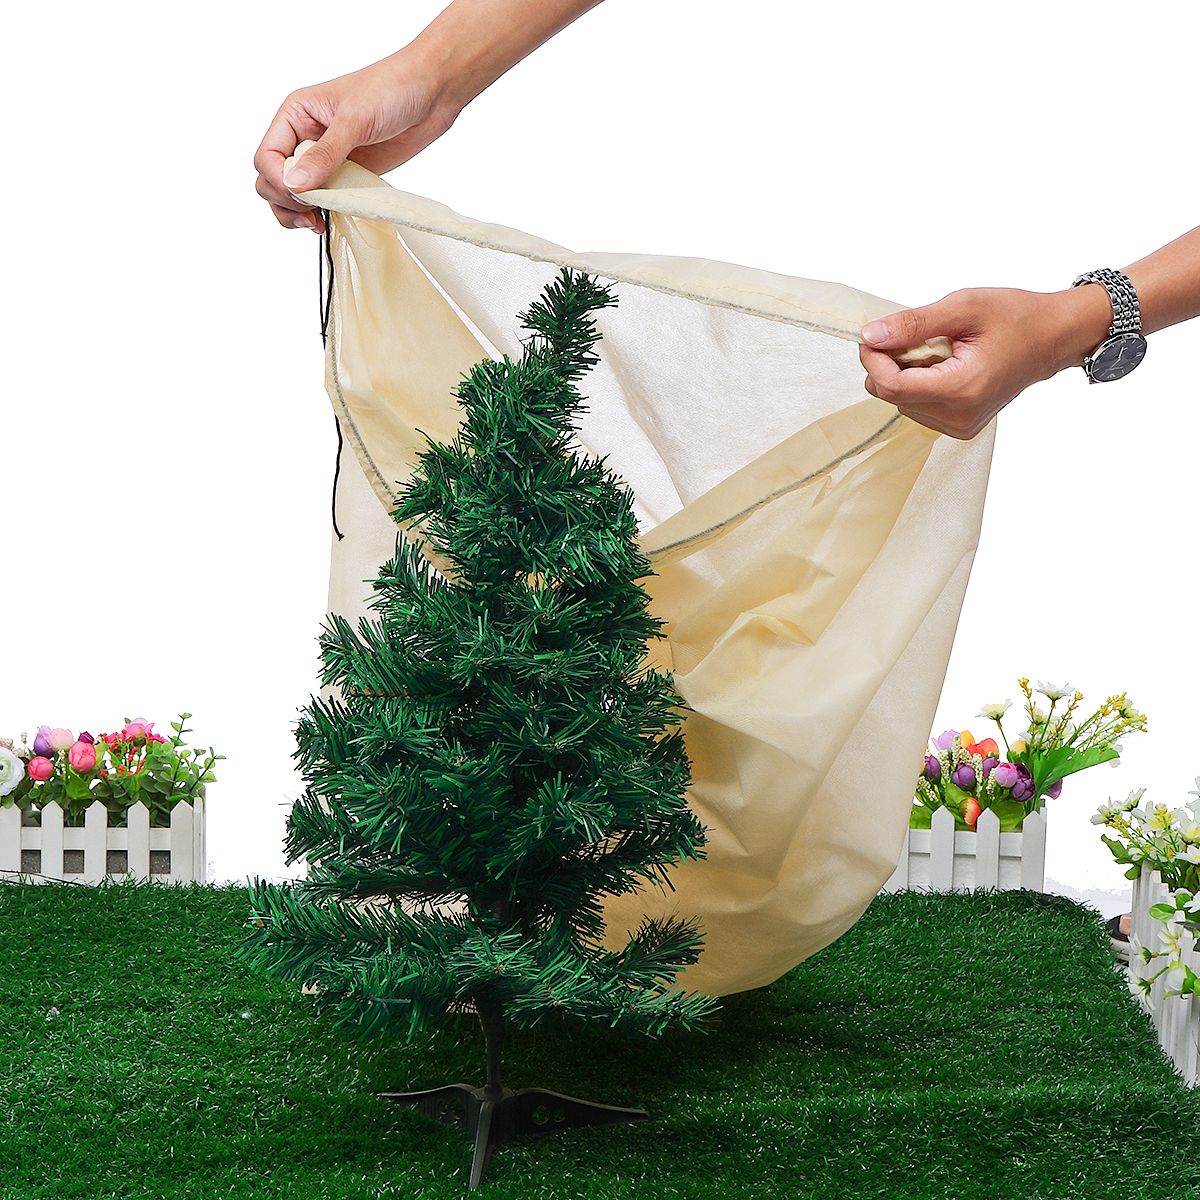 71x101cm-Plant-Cover-Garden-Shed-Storage-Anti-Frost-Sun-Bird-Insect-Protector-1688999